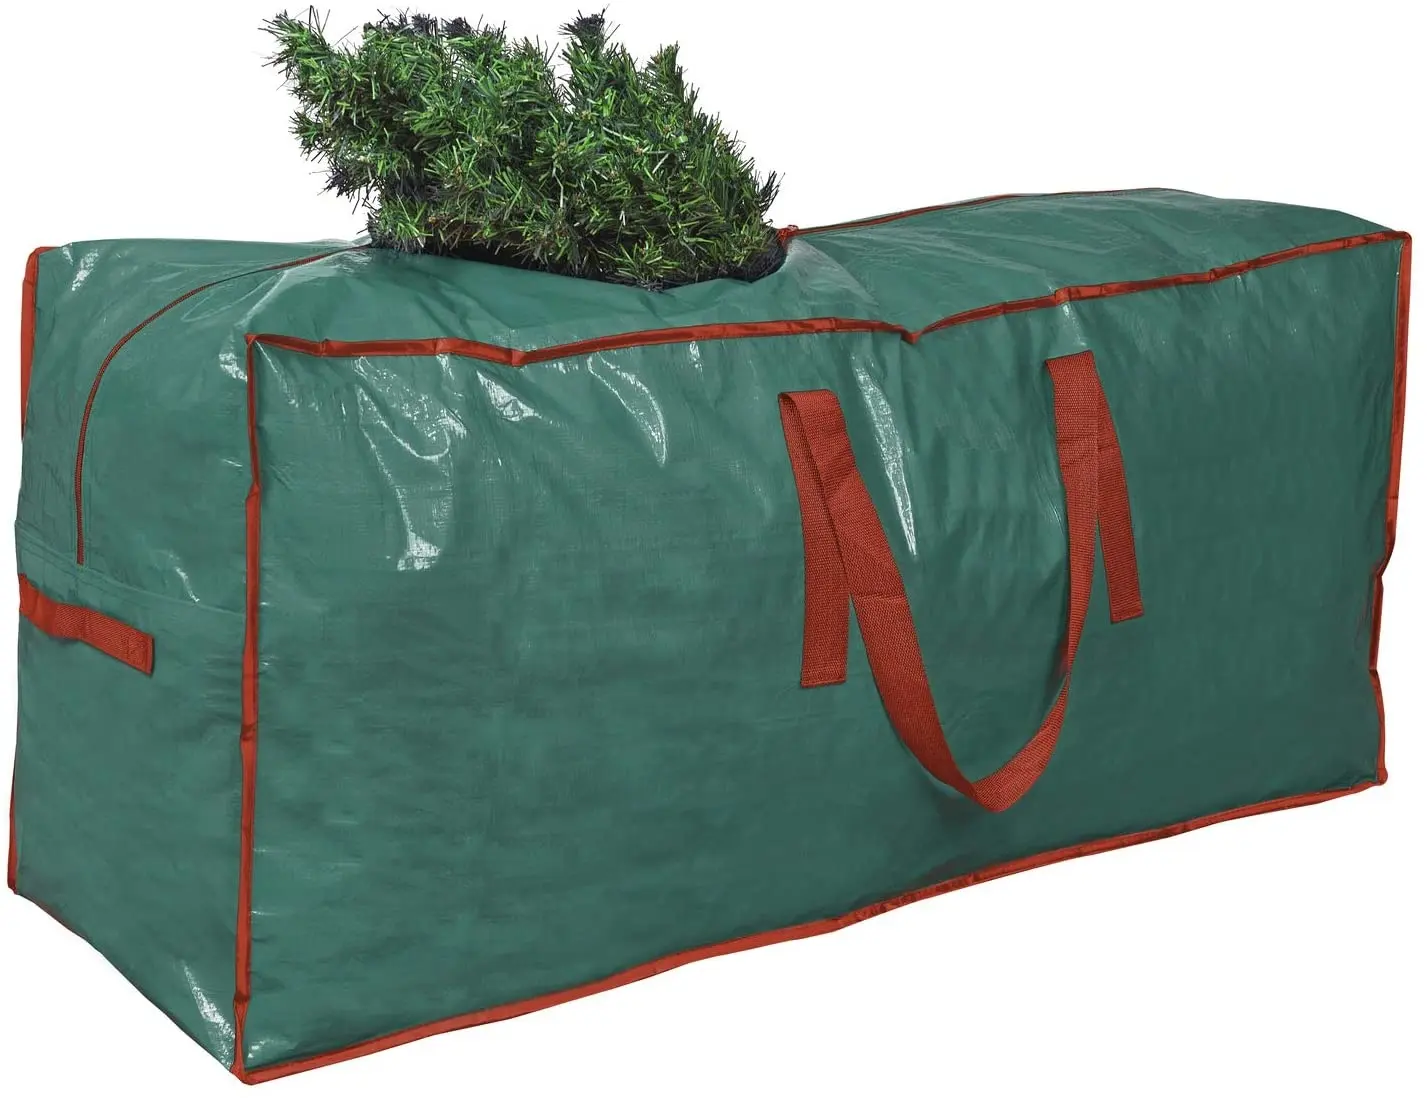 Christmas Tree Storage Bag Fits Up to 9 Feet Tall Tree, Holiday Tree Storage Case, Xmas Storage Container with Handles